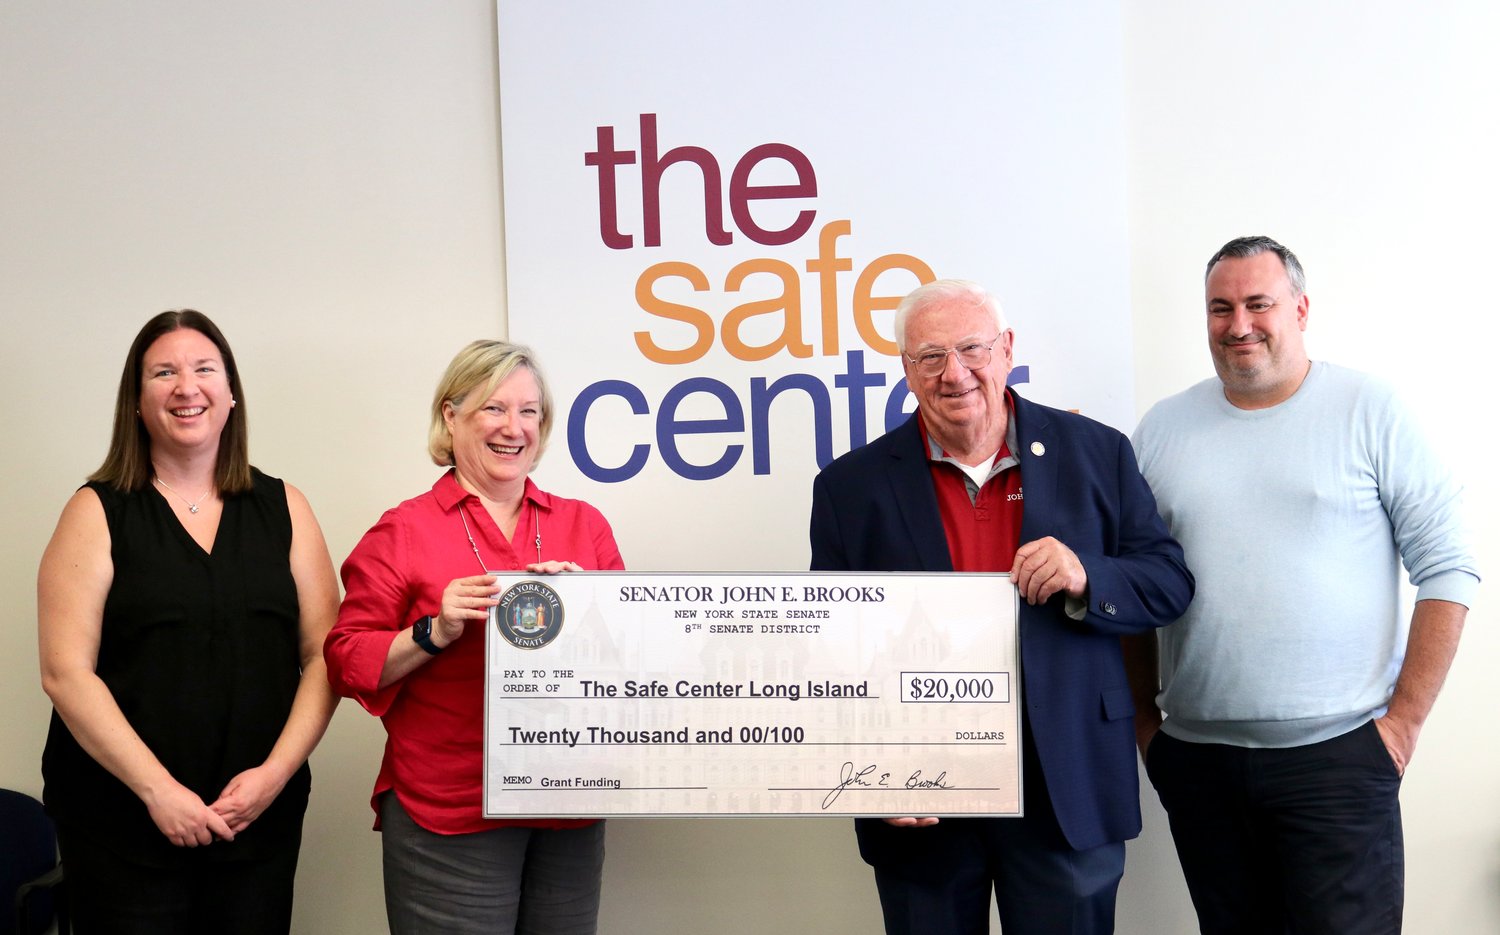 In an effort to support domestic violence and child abuse survivors, State Sen. John Brooks presented $20,000 to The Safe Center LI to aid its operations.